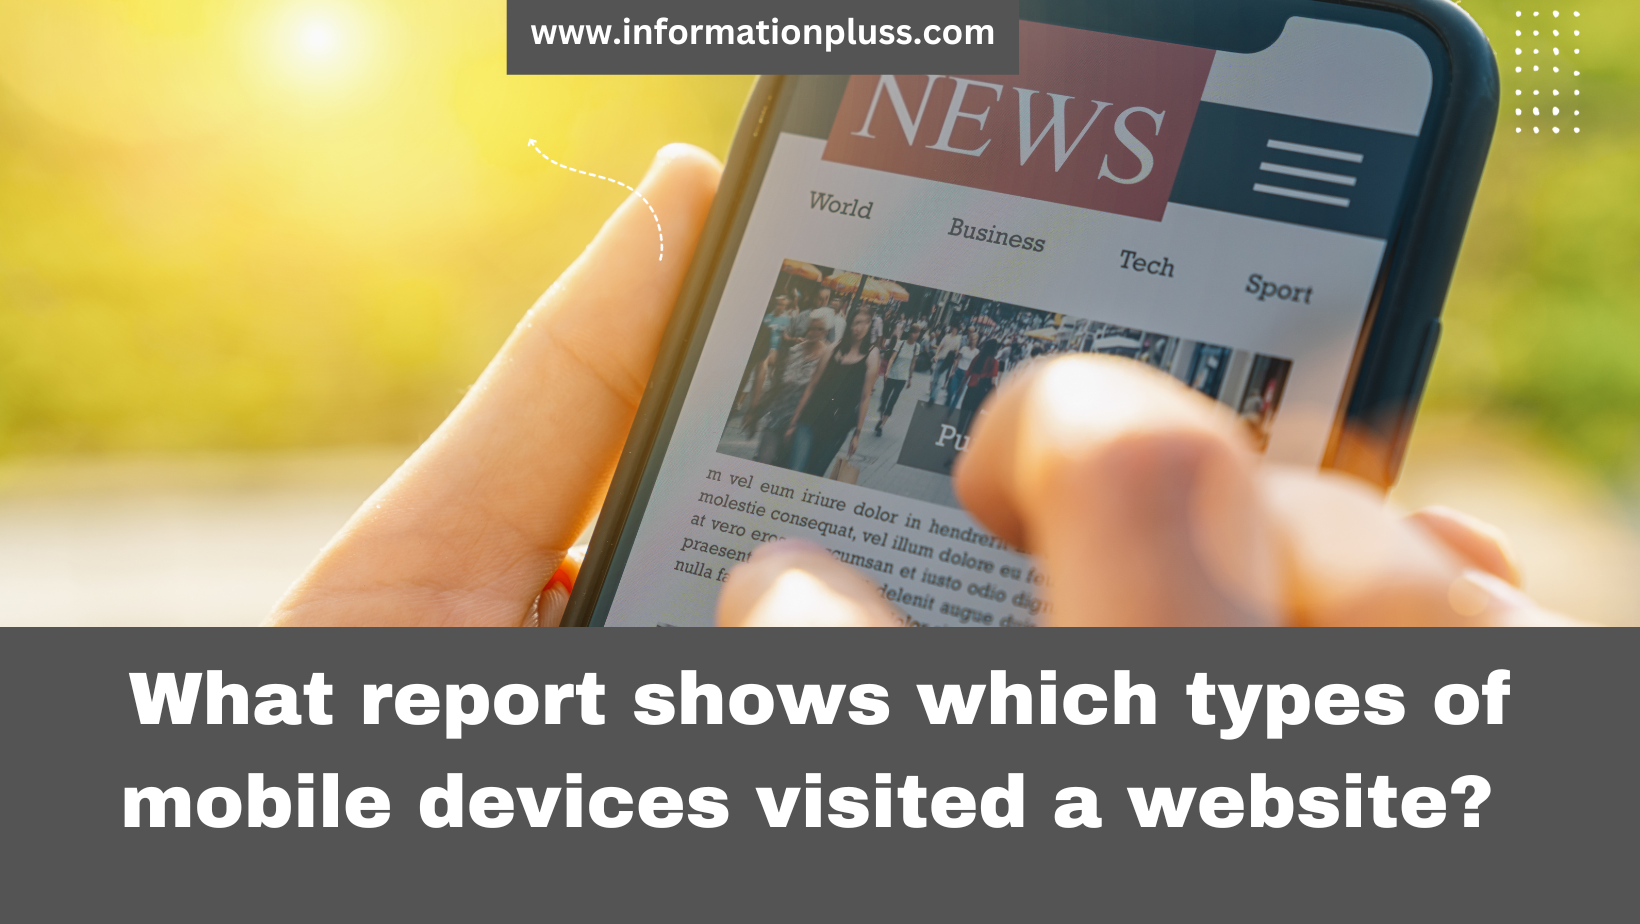 What report shows which types of mobile devices visited a website?